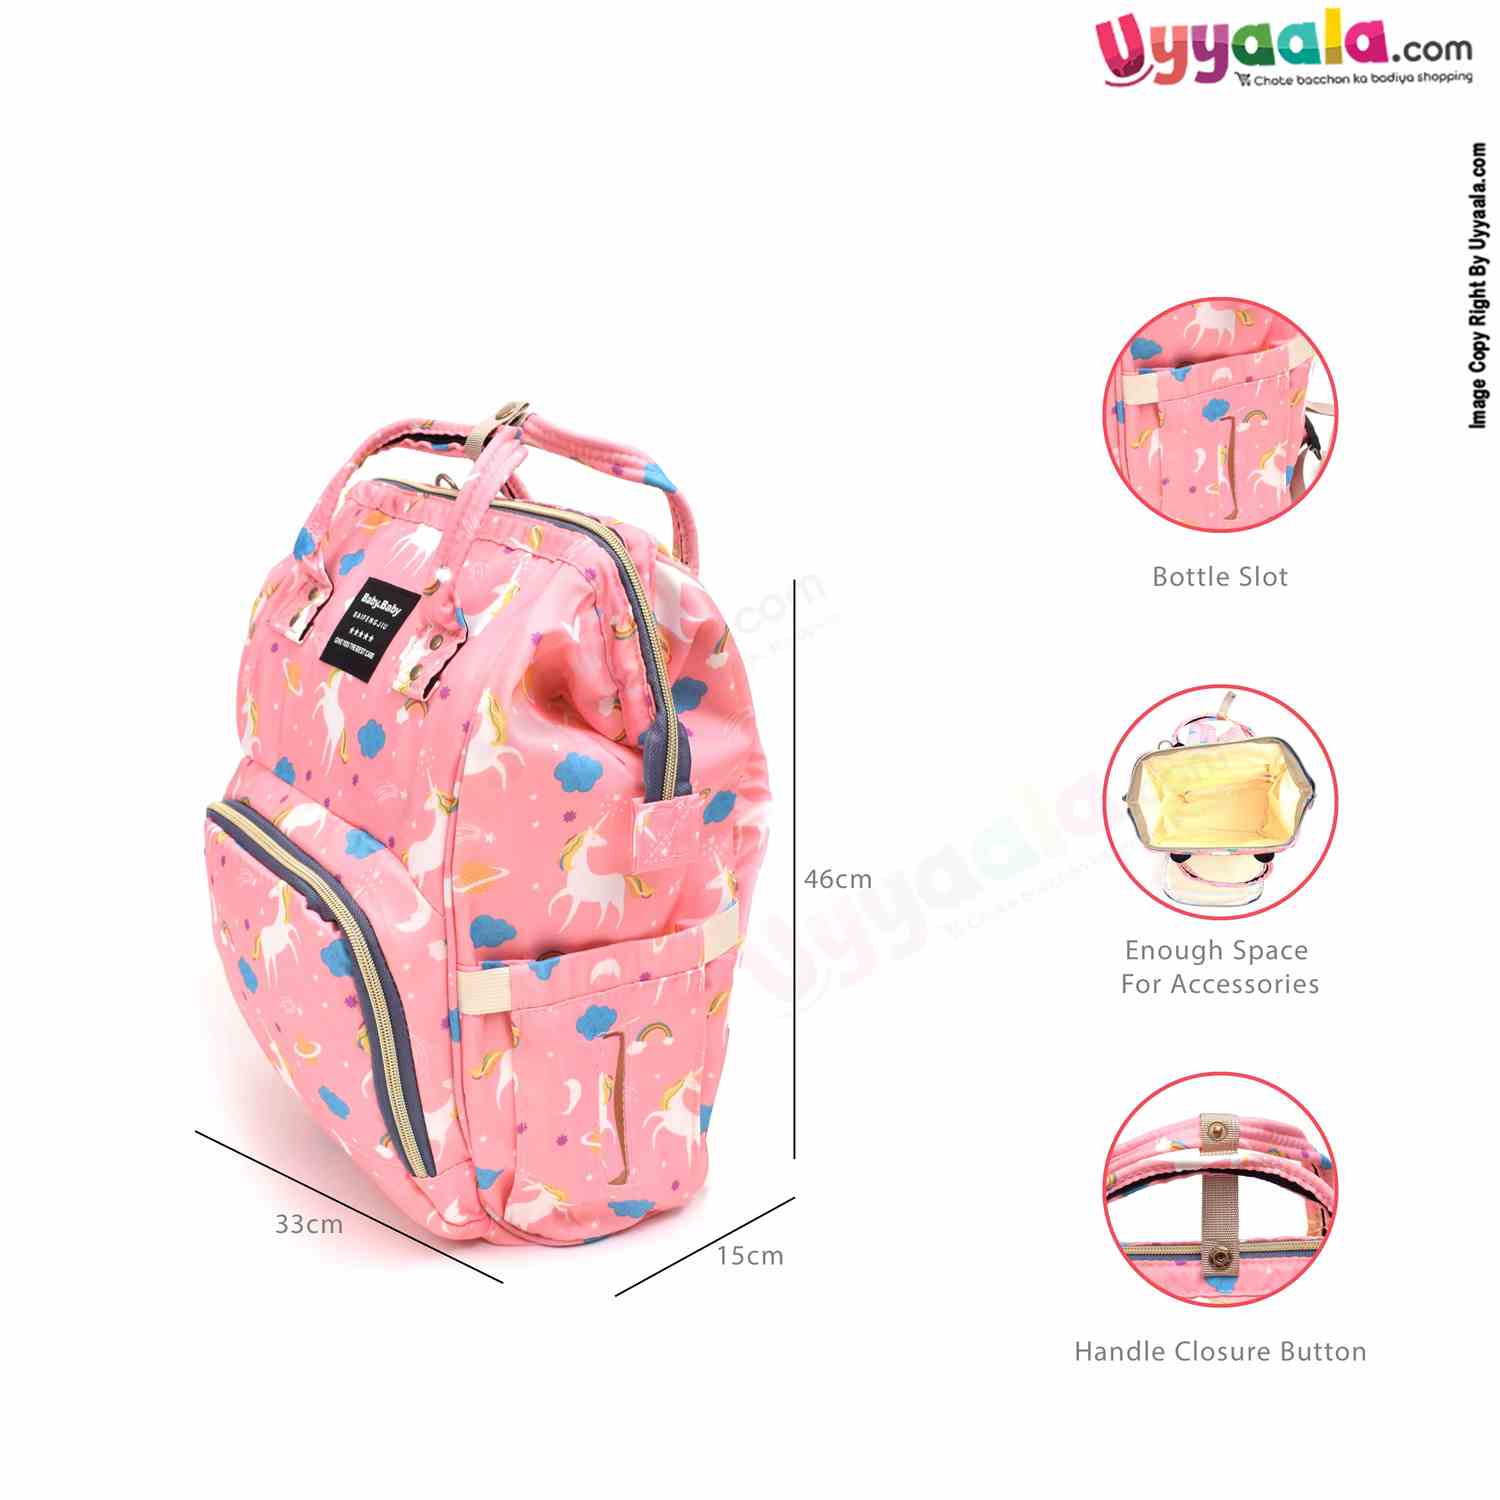 Mother's back pack (diaper bag) comfortable for travelling mothers, premium quality - size(45*33cm) - pink